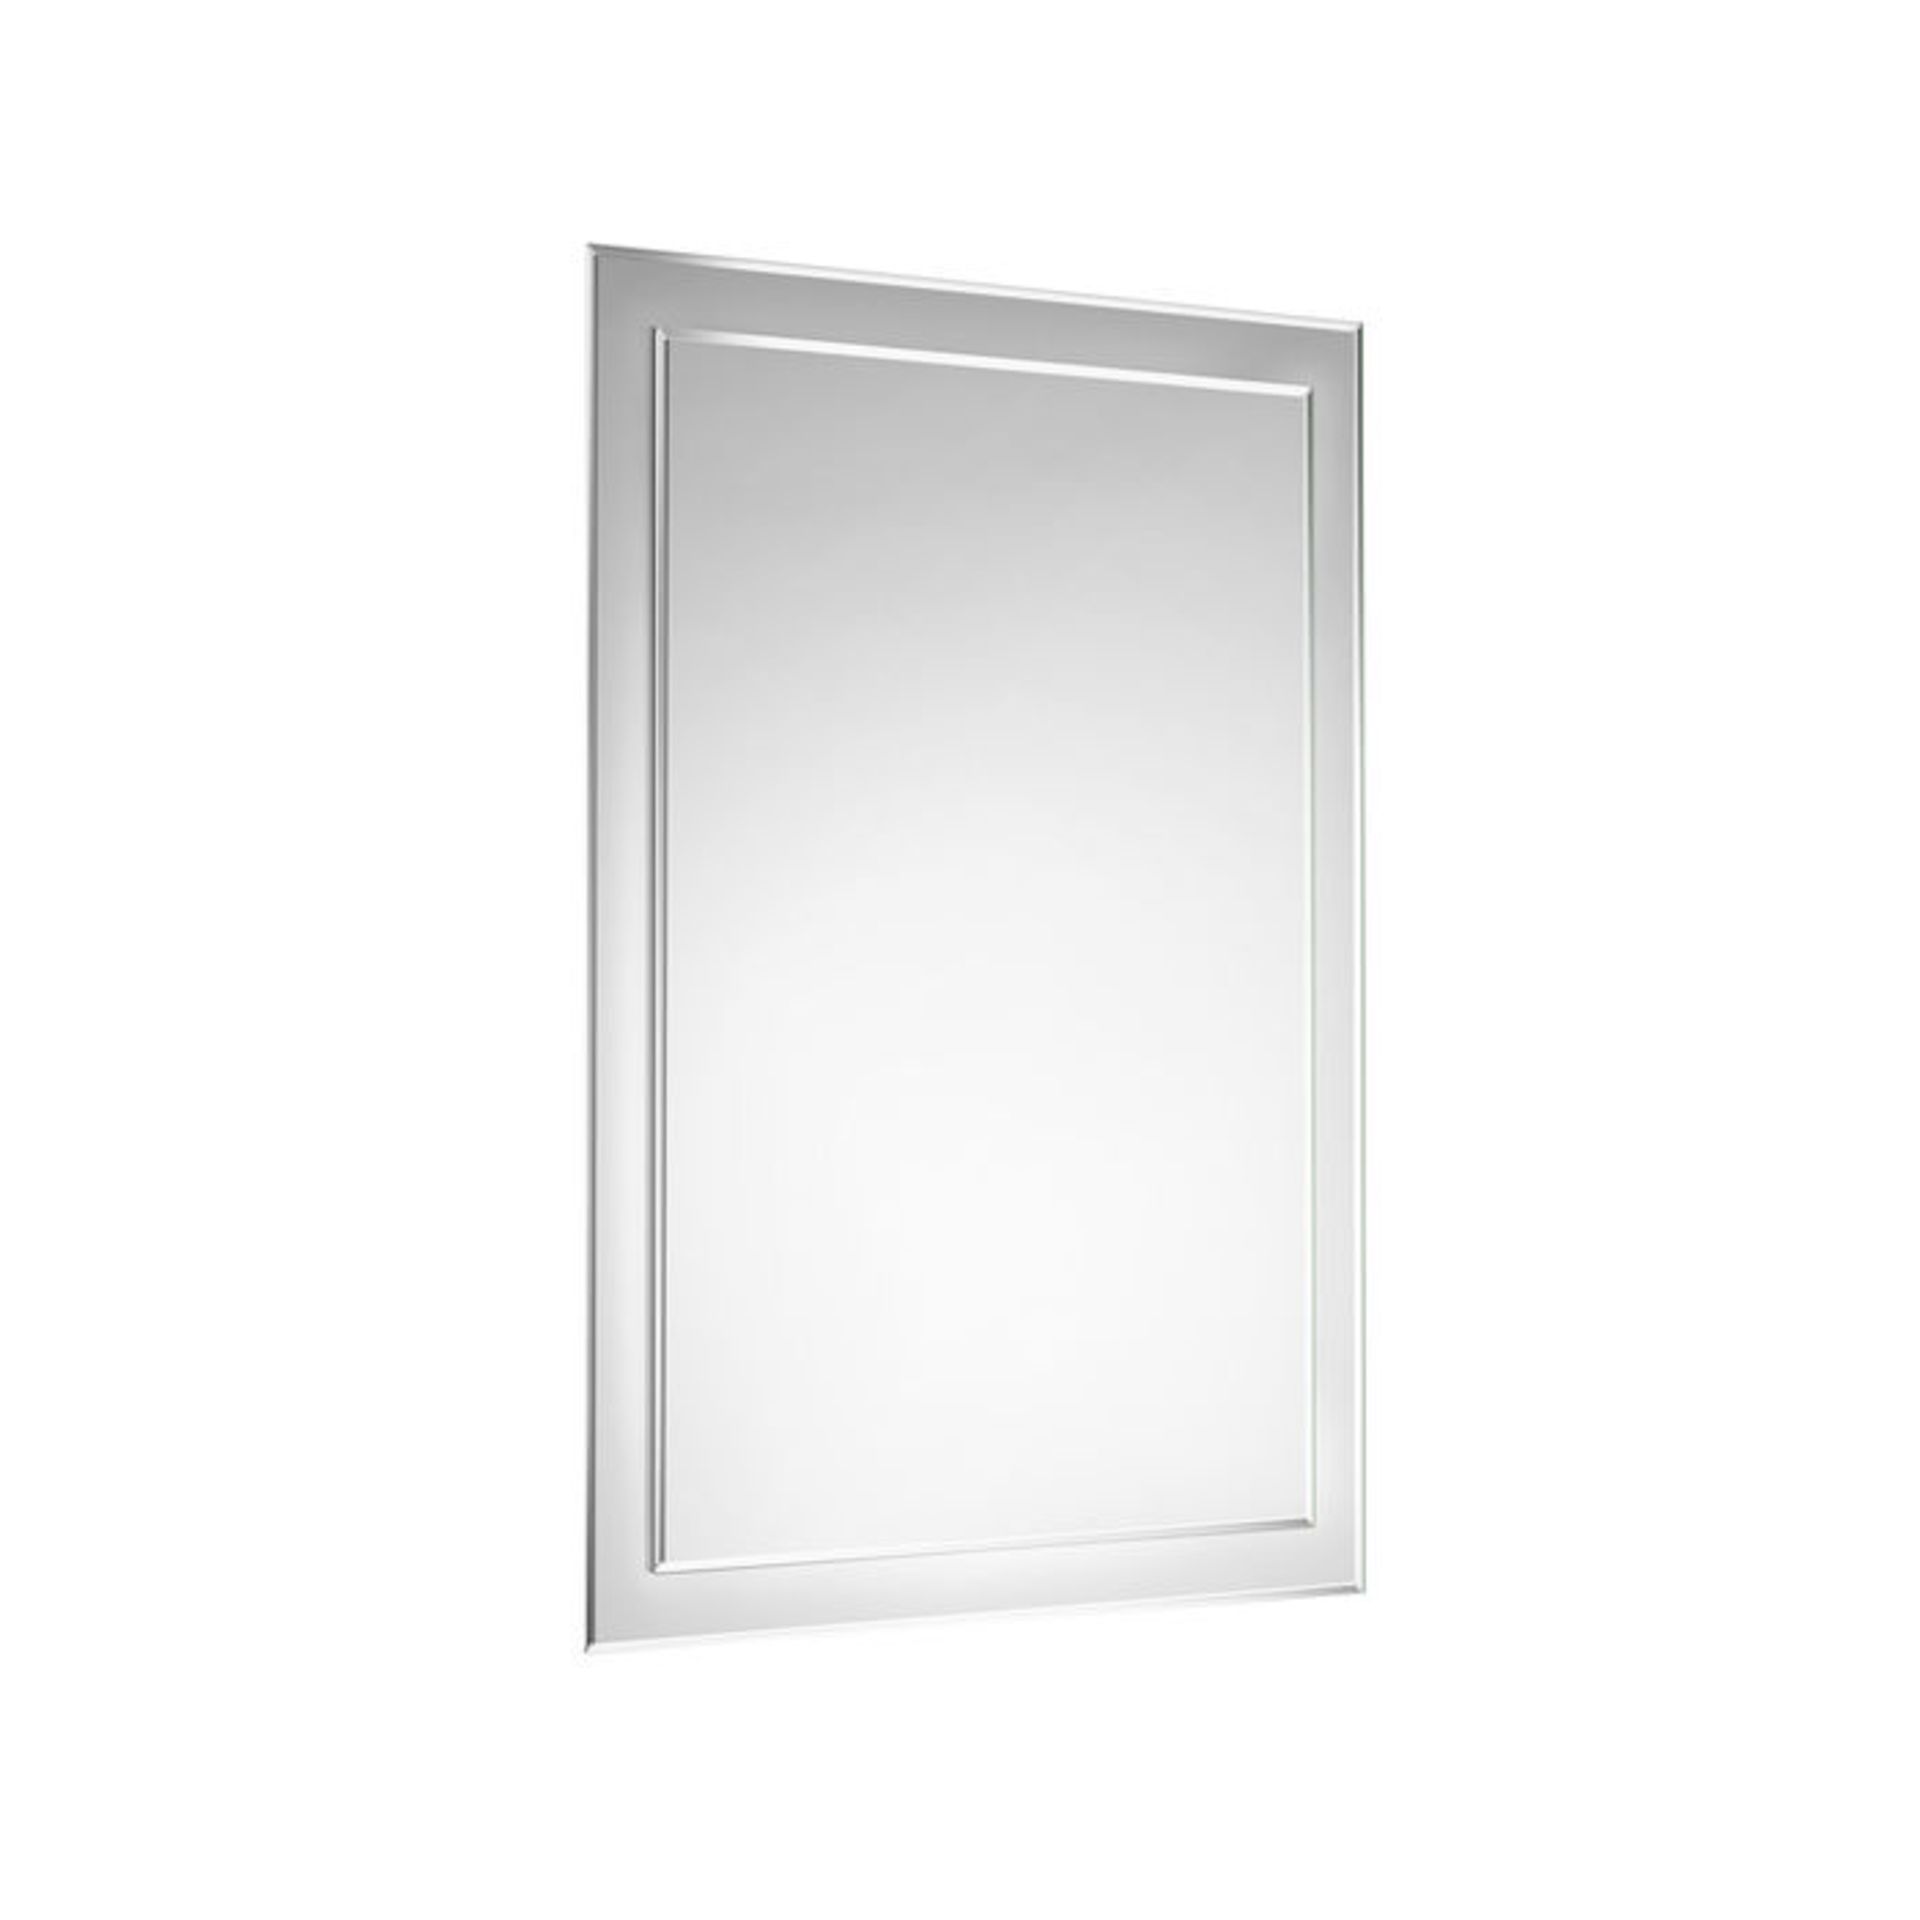 (MQ100) 500x700mm Bevel Mirror. RRP £75.00. Comes fully assembled for added convenience Versa...